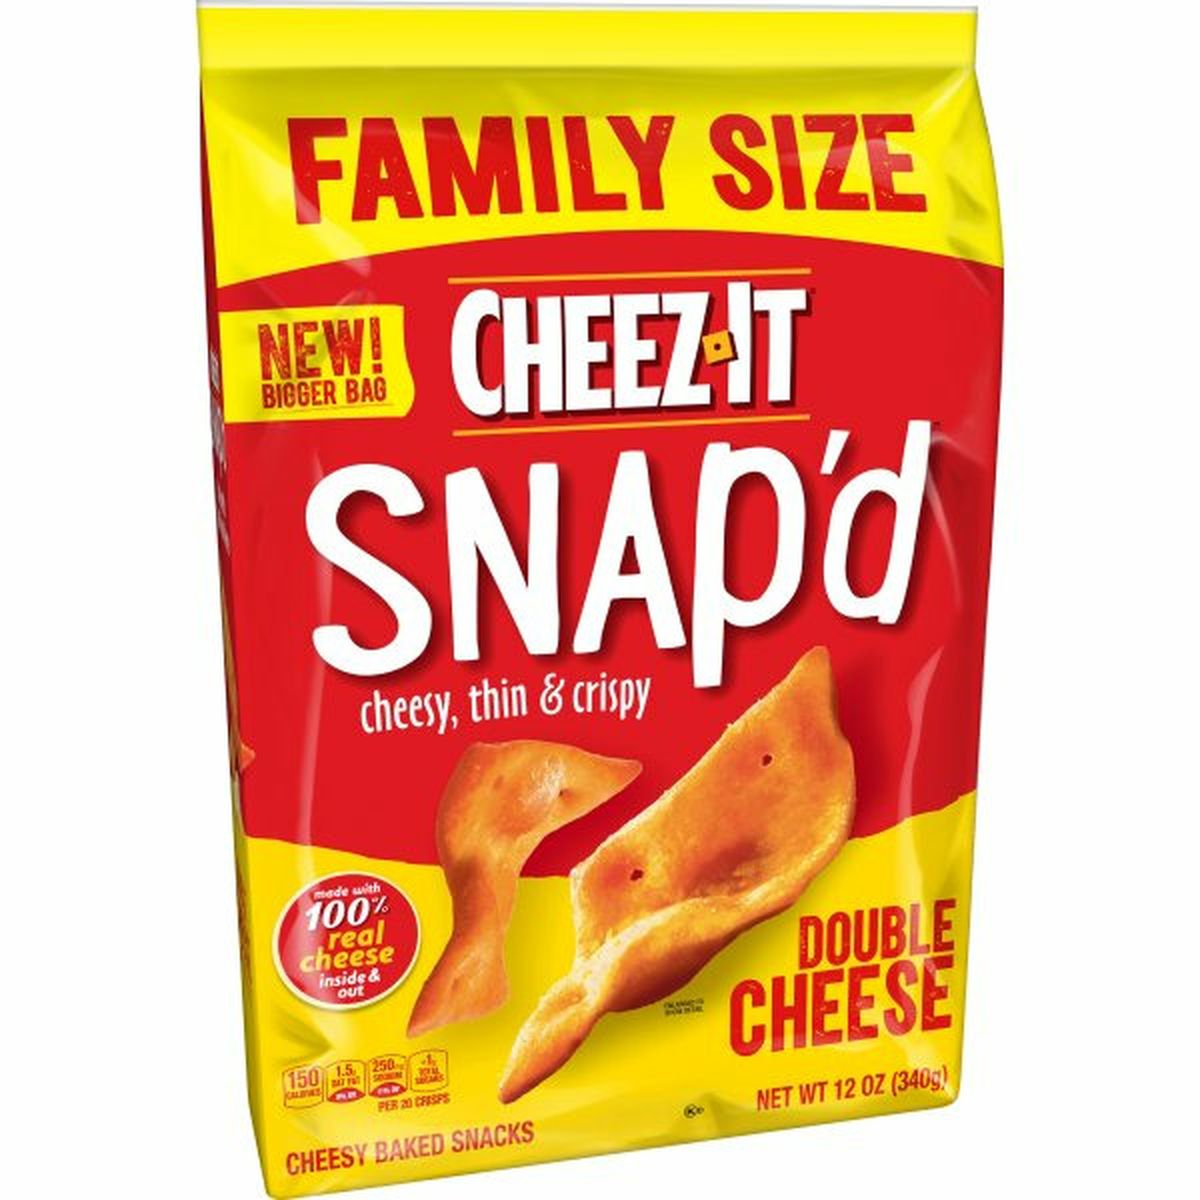 Calories in Cheez-It Crackers Cheez-It Cheesy Baked Snacks, Double Cheese, Family Size, 12oz